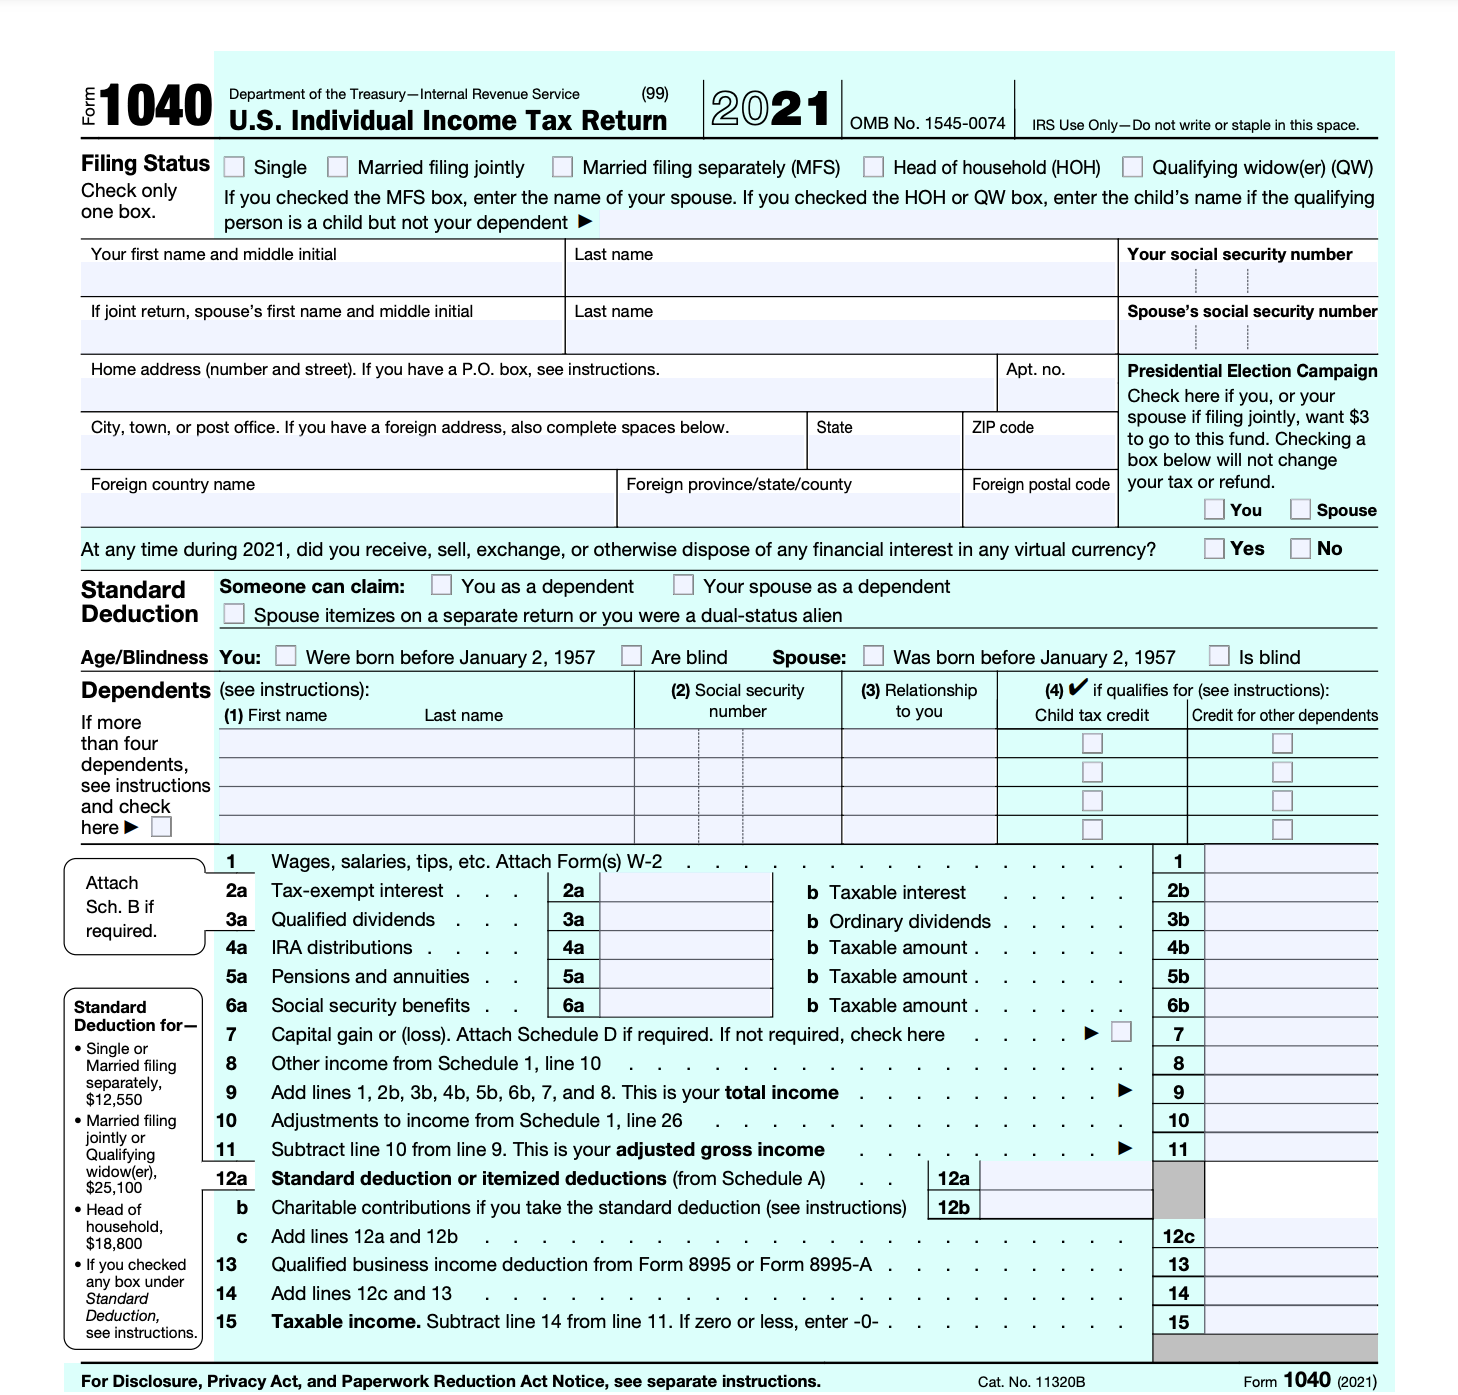 Irs Schedule 1 Instructions 2022 What Is Irs Form 1040? (Overview And Instructions) | Bench Accounting